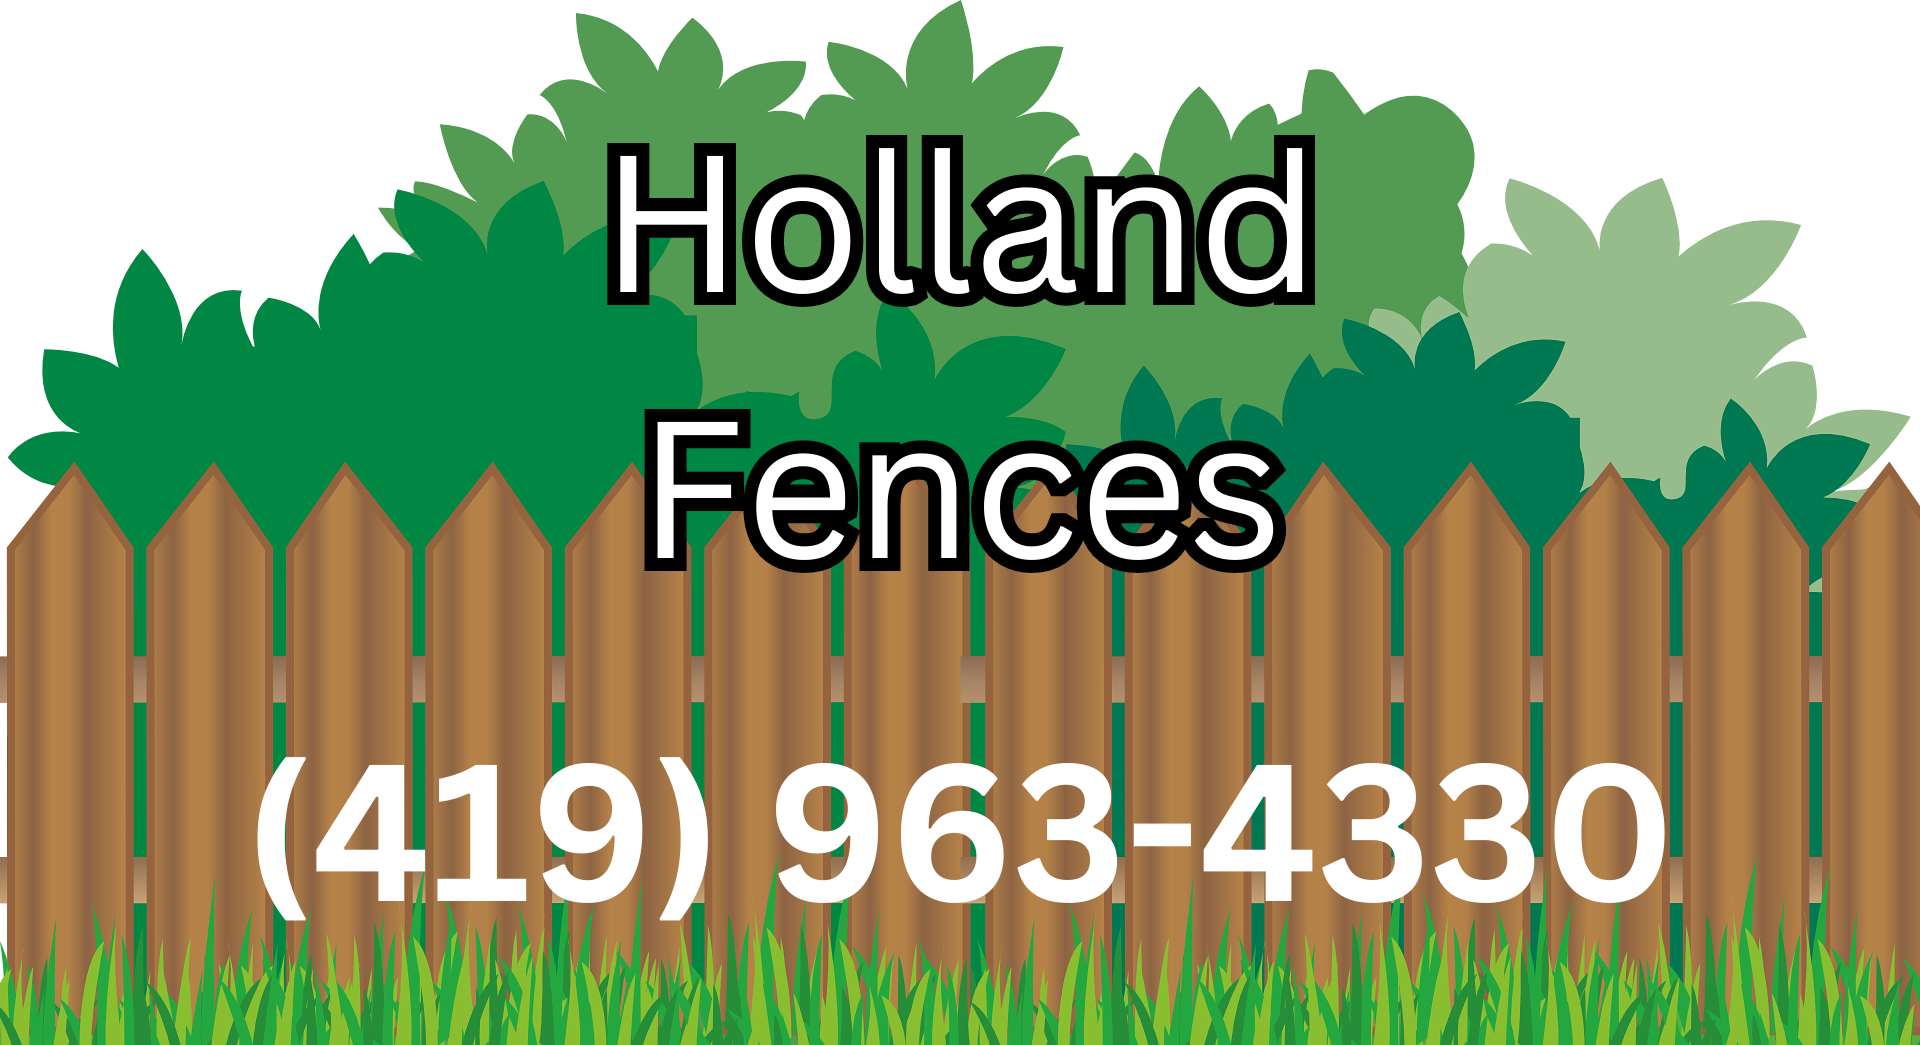 Fence Companies in Holland